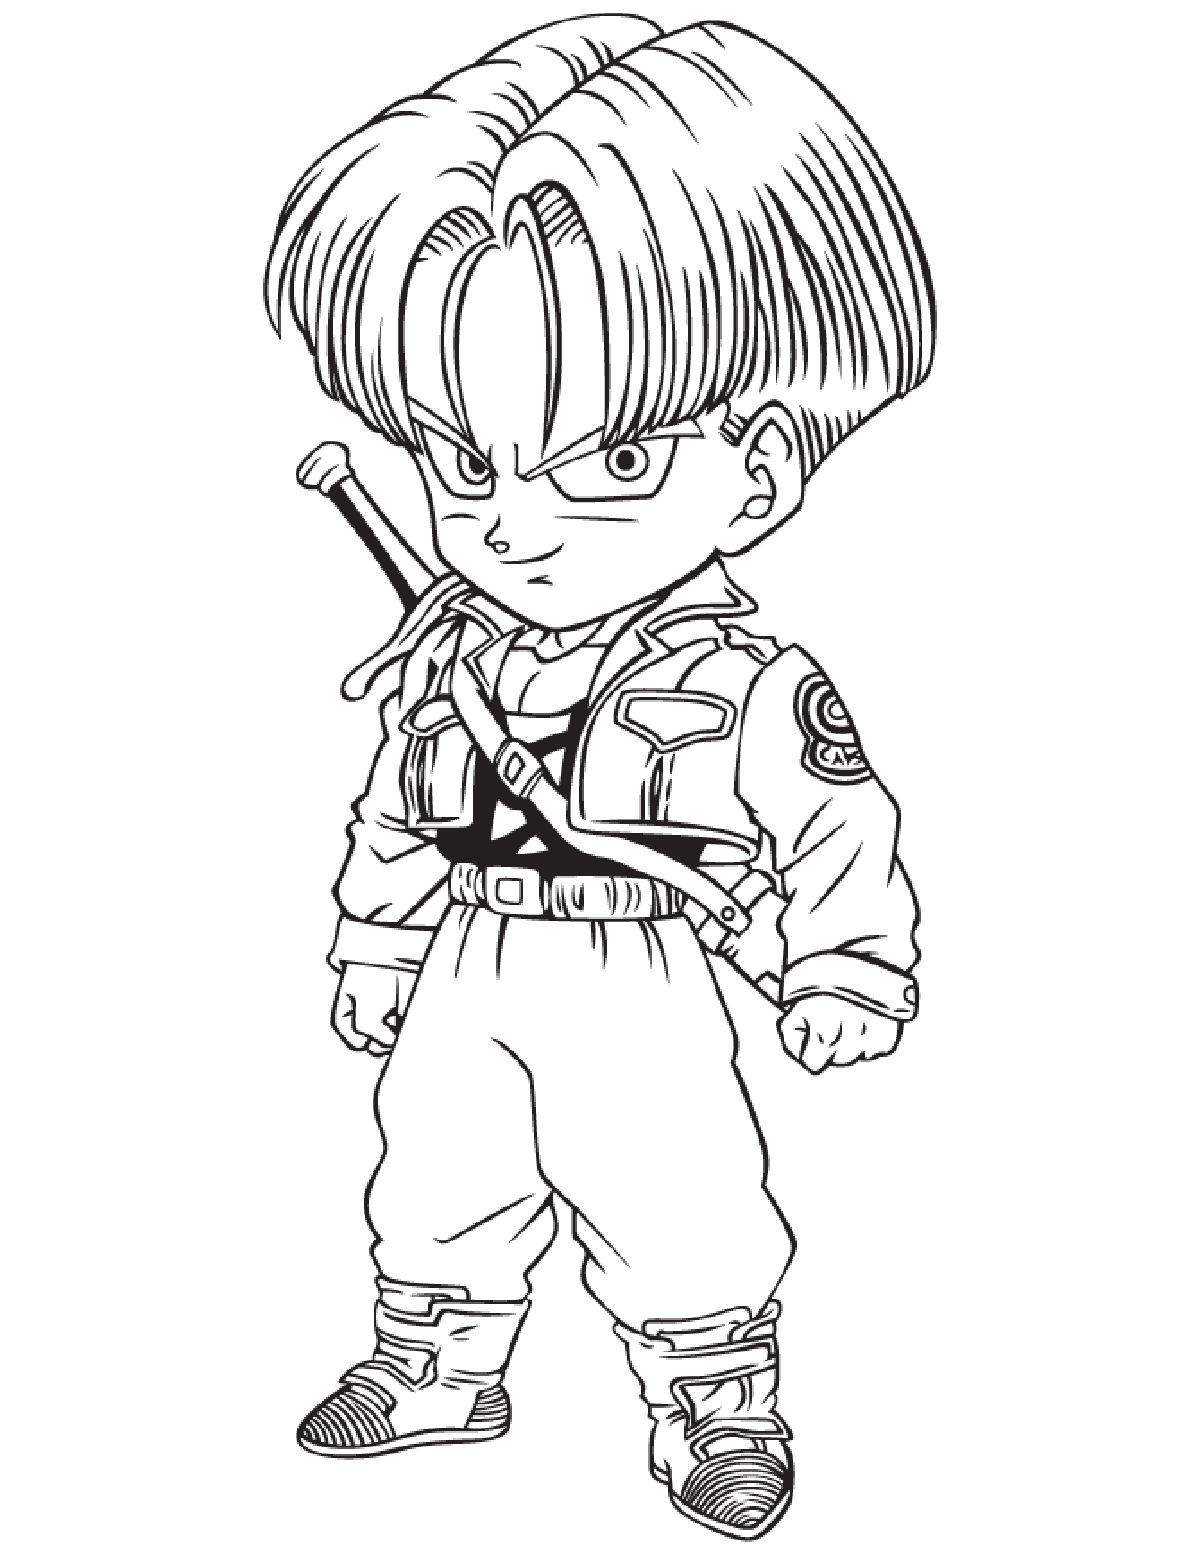 Dragon Ball Z coloring page with few details for kids : Trunks Kid